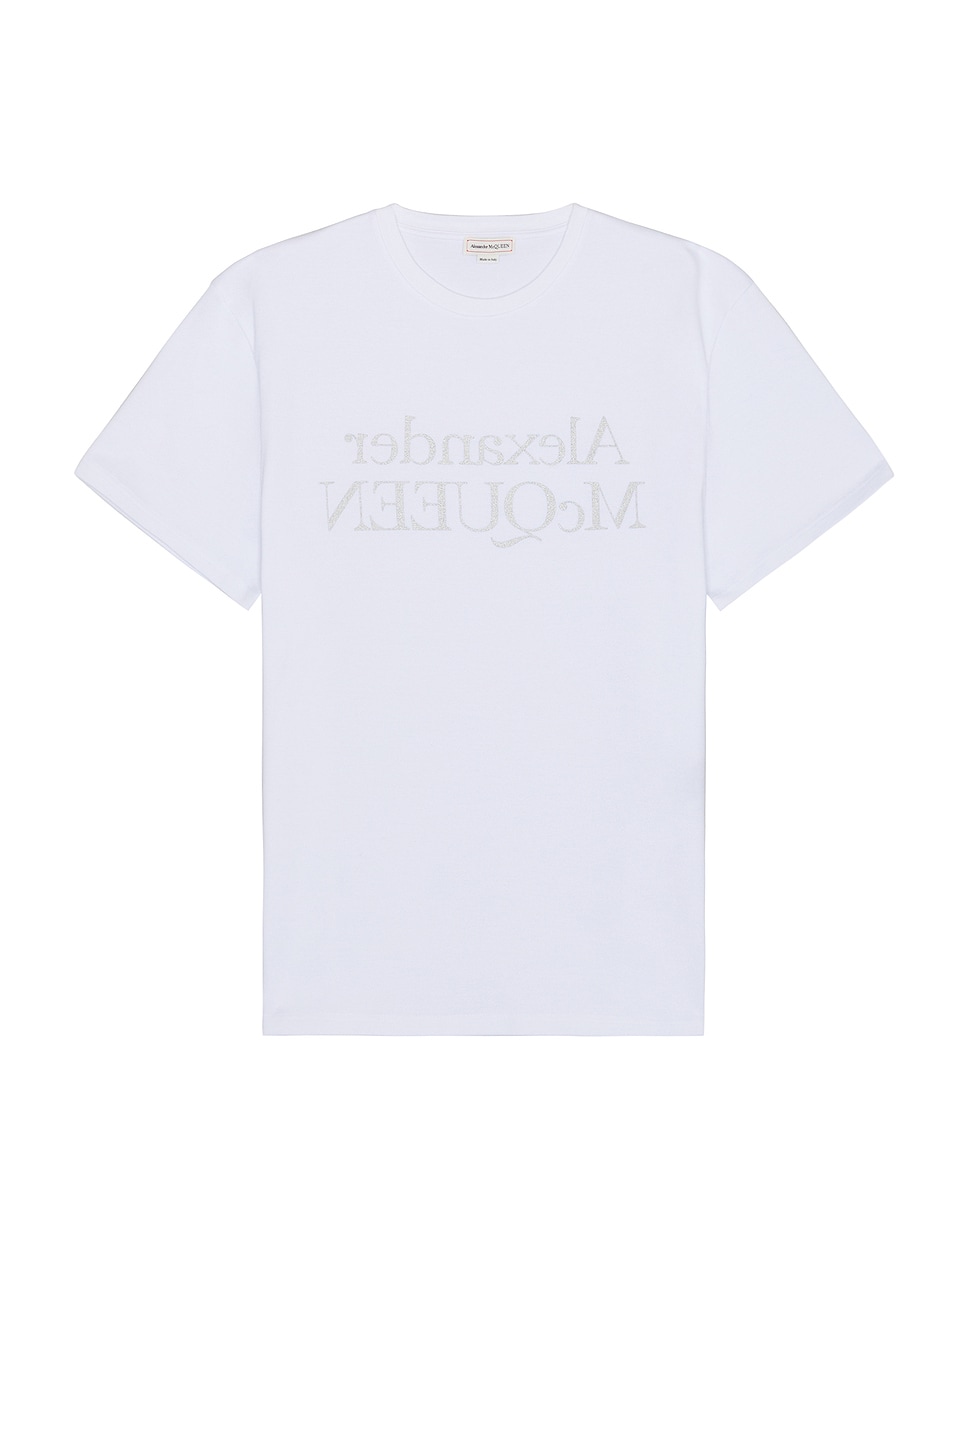 Image 1 of Alexander McQueen Short Sleeve T-shirt in White & Silver